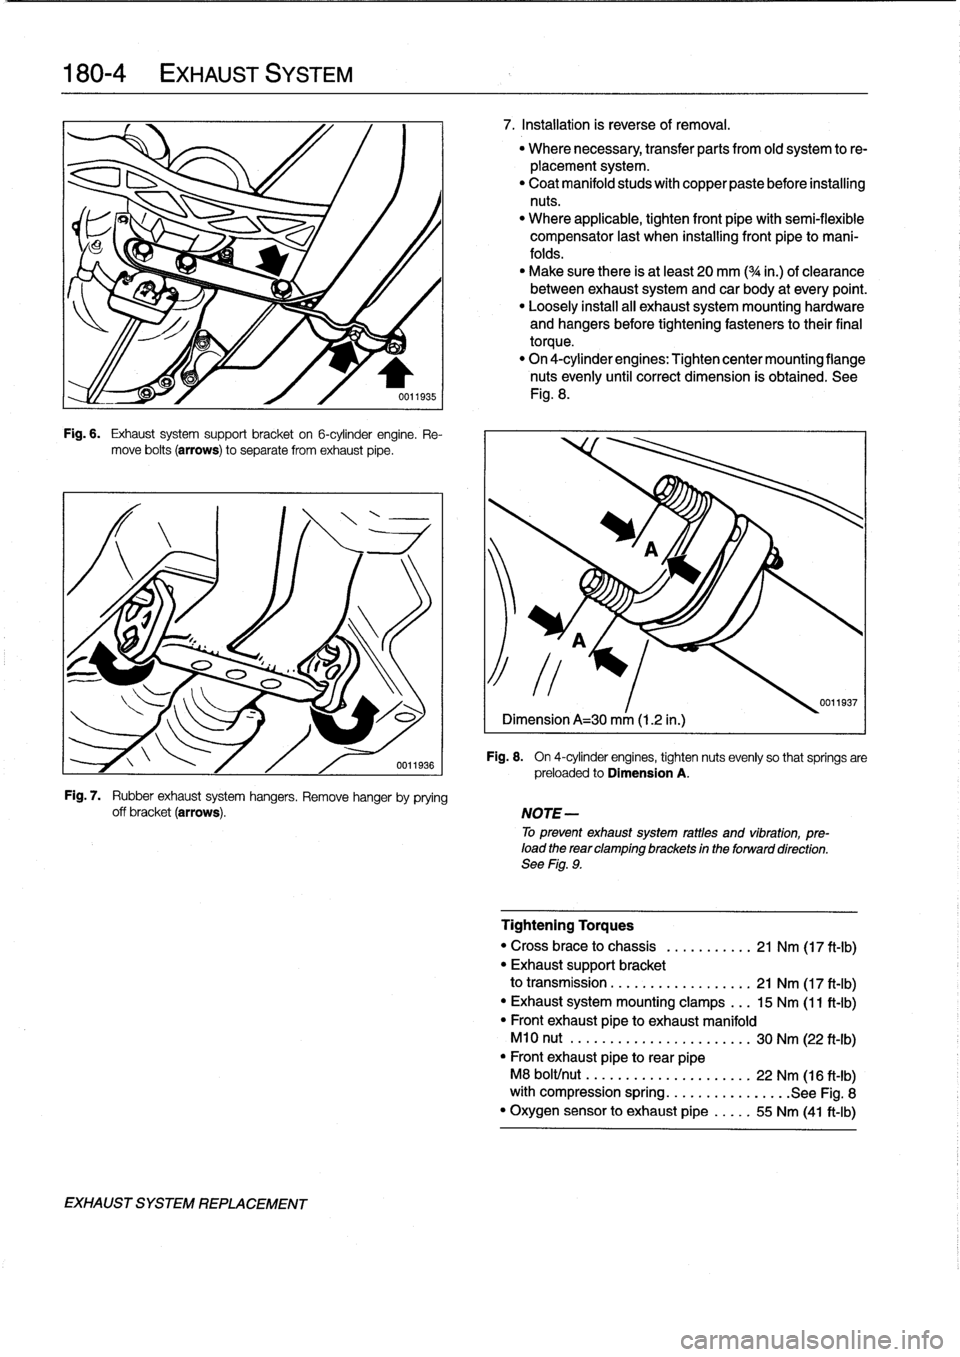 BMW 318i 1996 E36 Workshop Manual 
180-
4

	

EXHAUST
SYSTEM

Fig
.
6
.

	

Exhaust
system
support
bracket
on
6-cylinder
engine
.
Re-
move
bolts
(arrows)
to
separate
from
exhaust
pipe
.

Fig
.
7
.

	

Rubber
exhaust
system
hangers
.
R